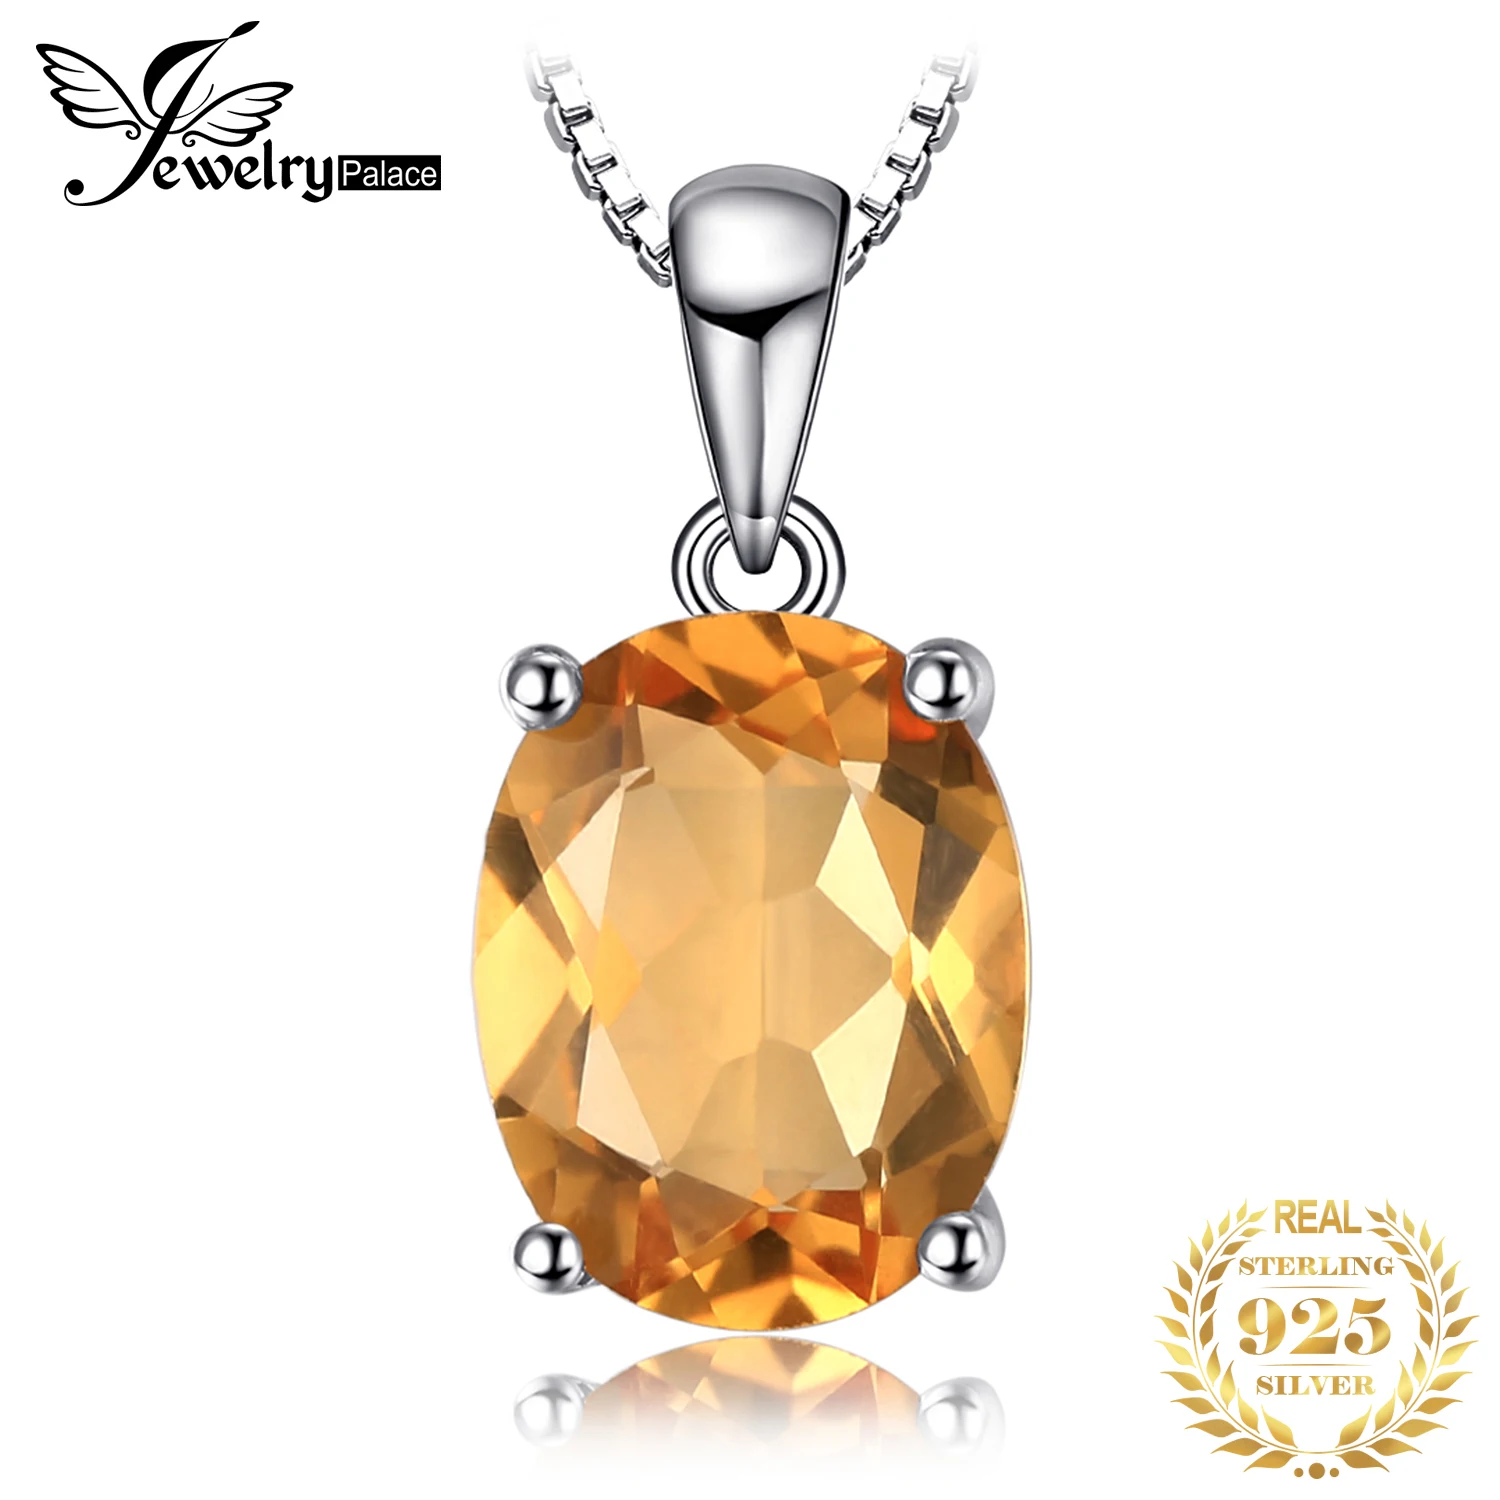 JewelryPalace Oval Yellow Genuine Natural Citrine 925 Sterling Silver Pendant Necklace Gemstone Necklace for Women No Chain